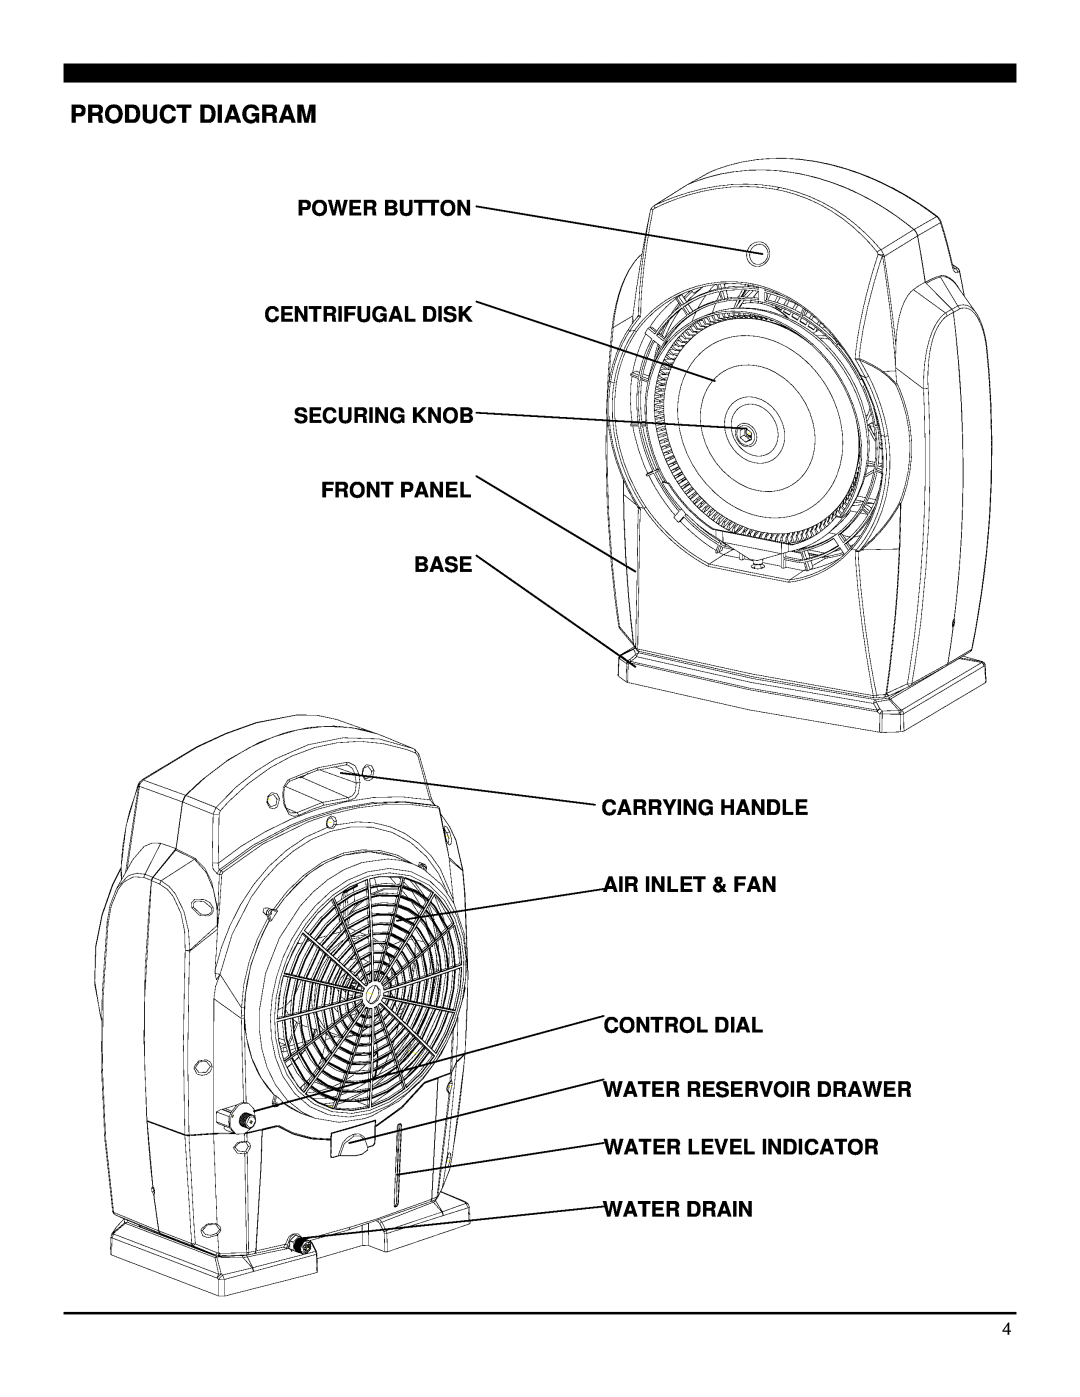 Soleus Air MT1-19-33 Product Diagram, Power Button Centrifugal Disk Securing Knob, Control Dial Water Reservoir Drawer 